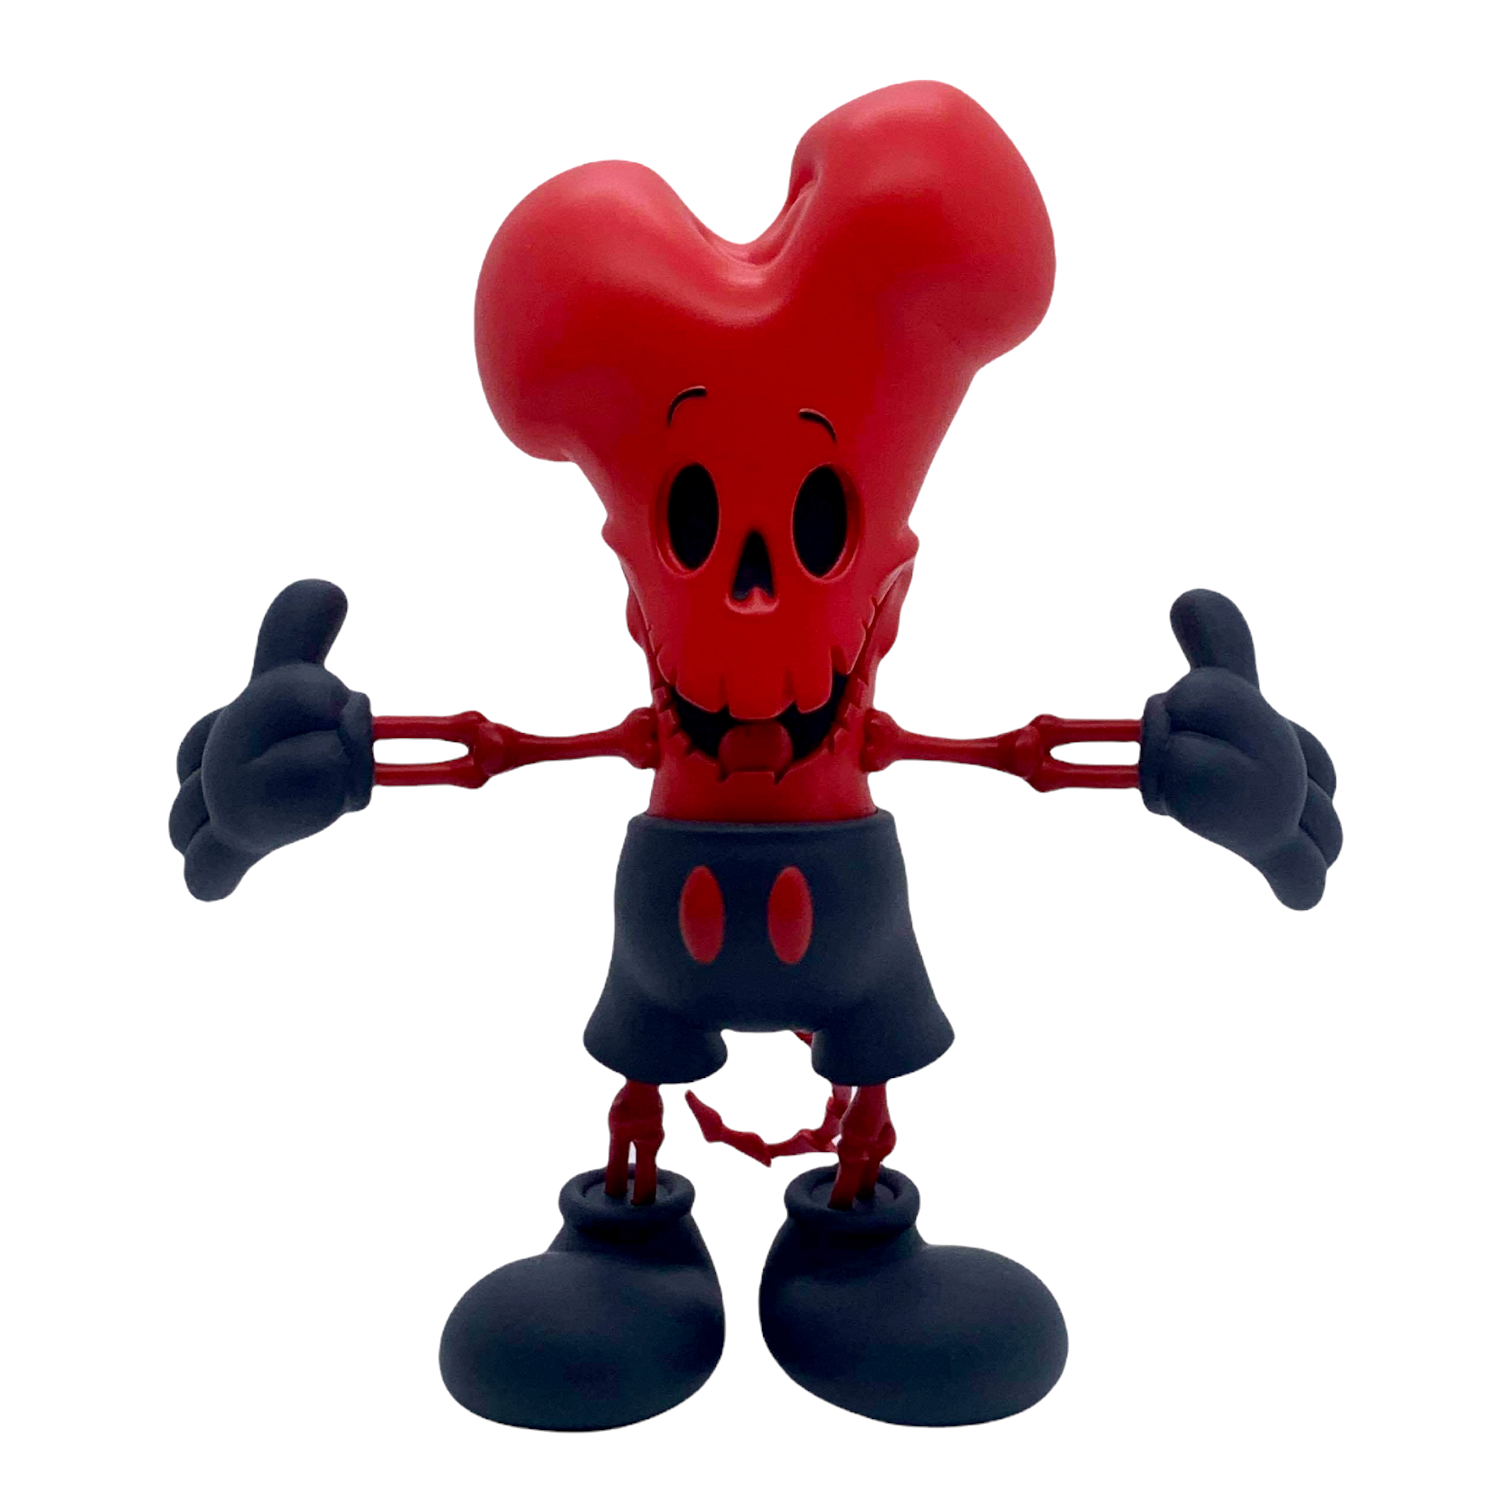 Bonehead 6-inch vinyl figure Red Bone Edition by BeastWreck x Strangecat Toys Available Now